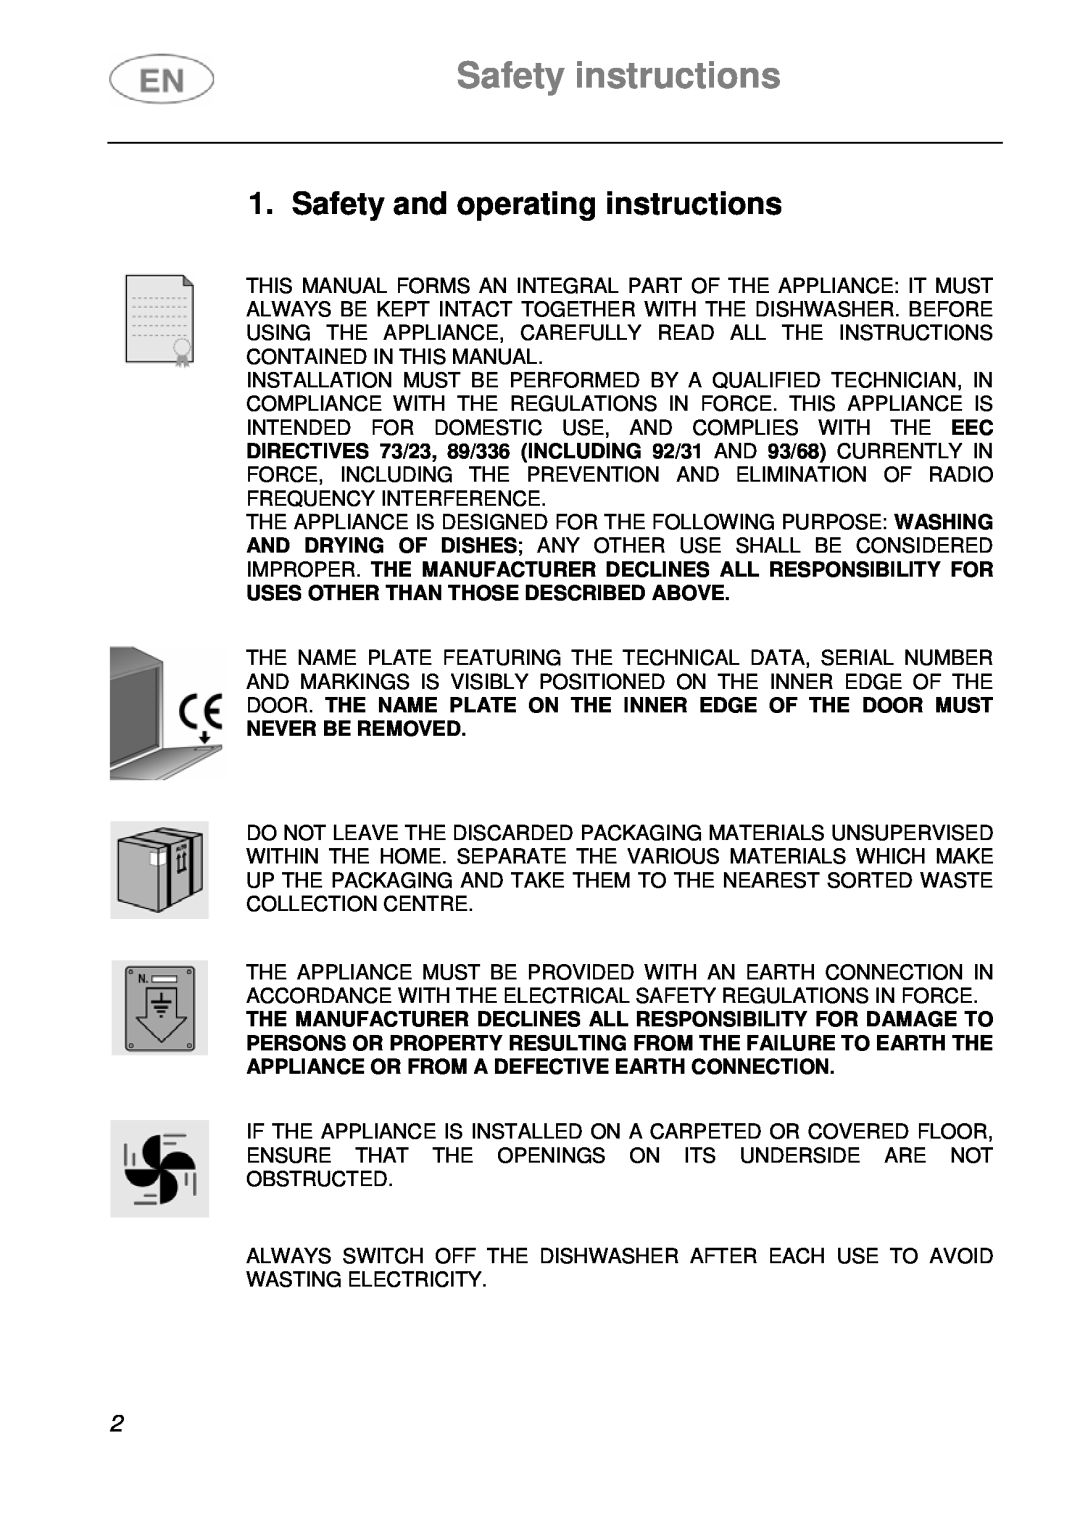 Smeg STA6246, STA6245 Safety instructions, Safety and operating instructions, Uses Other Than Those Described Above 